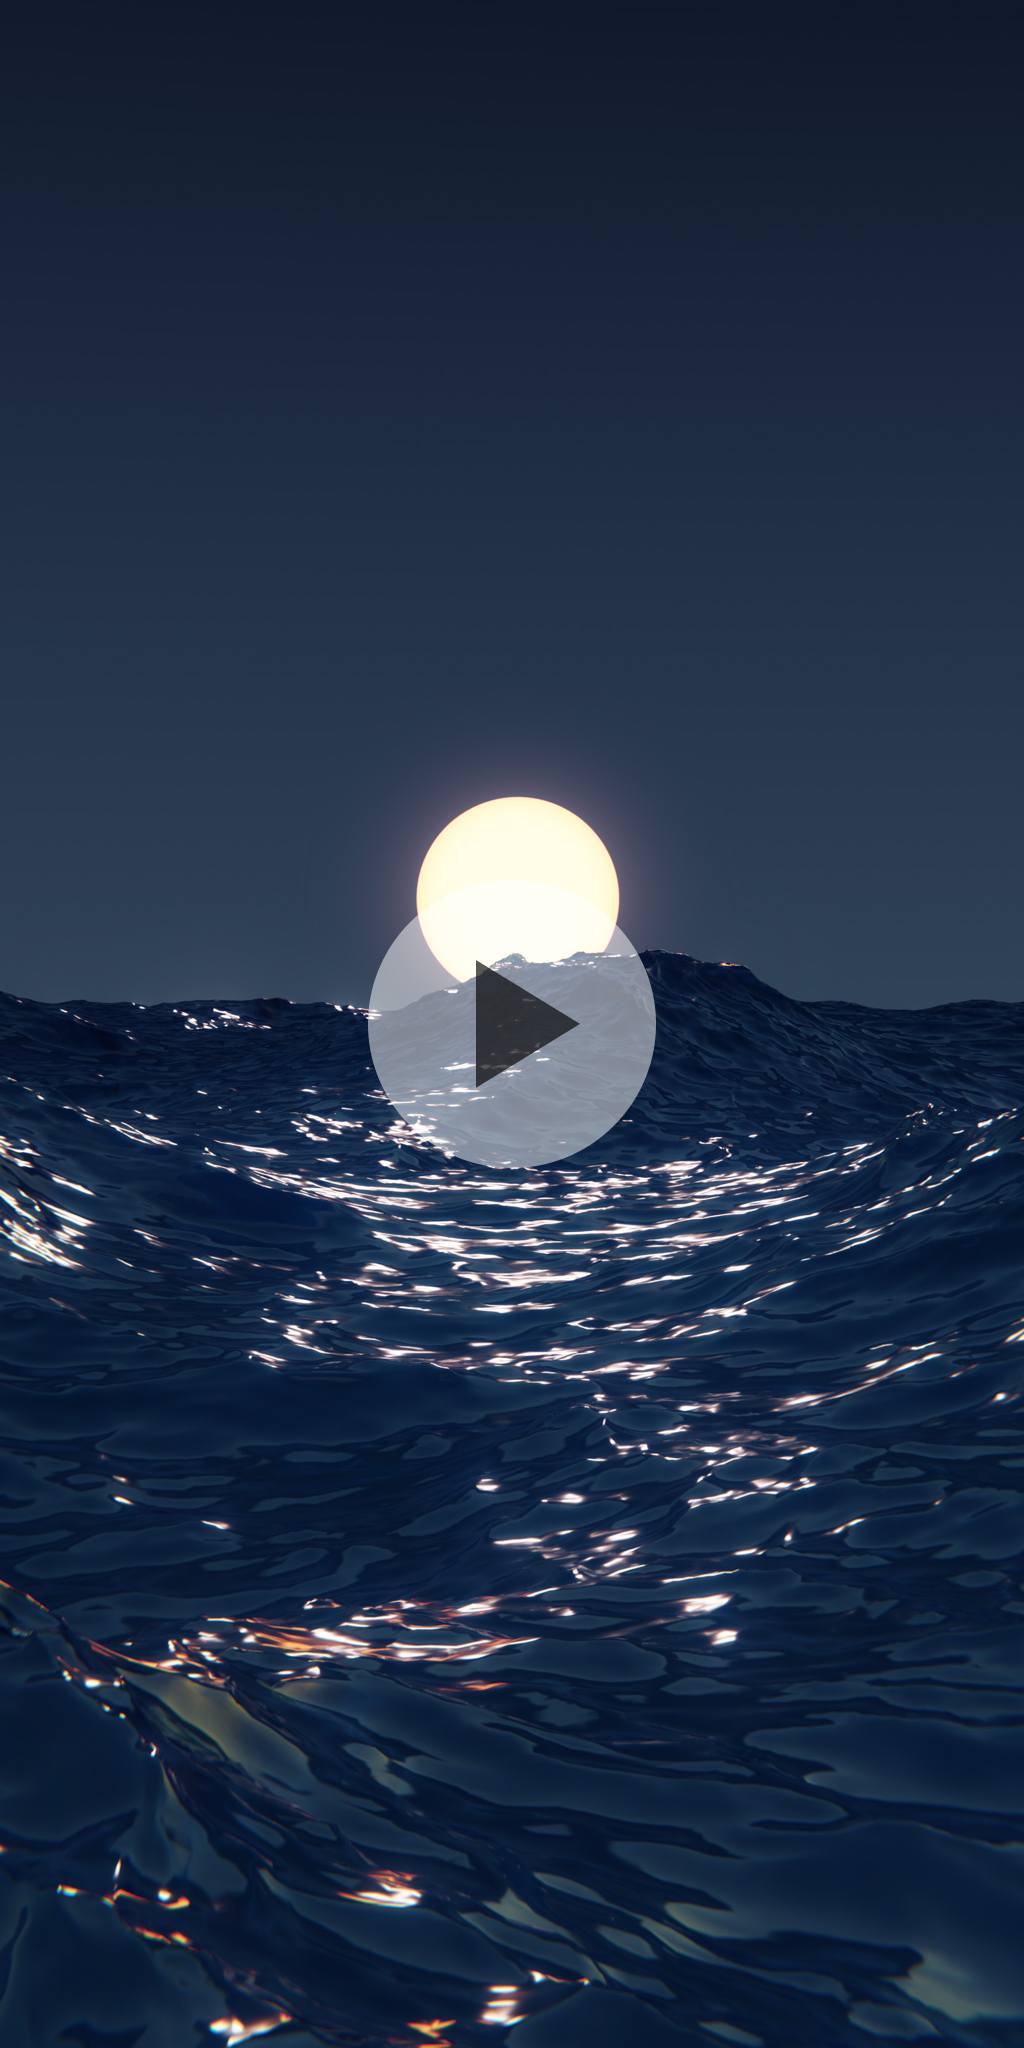 Water and moon. Live wallpaper